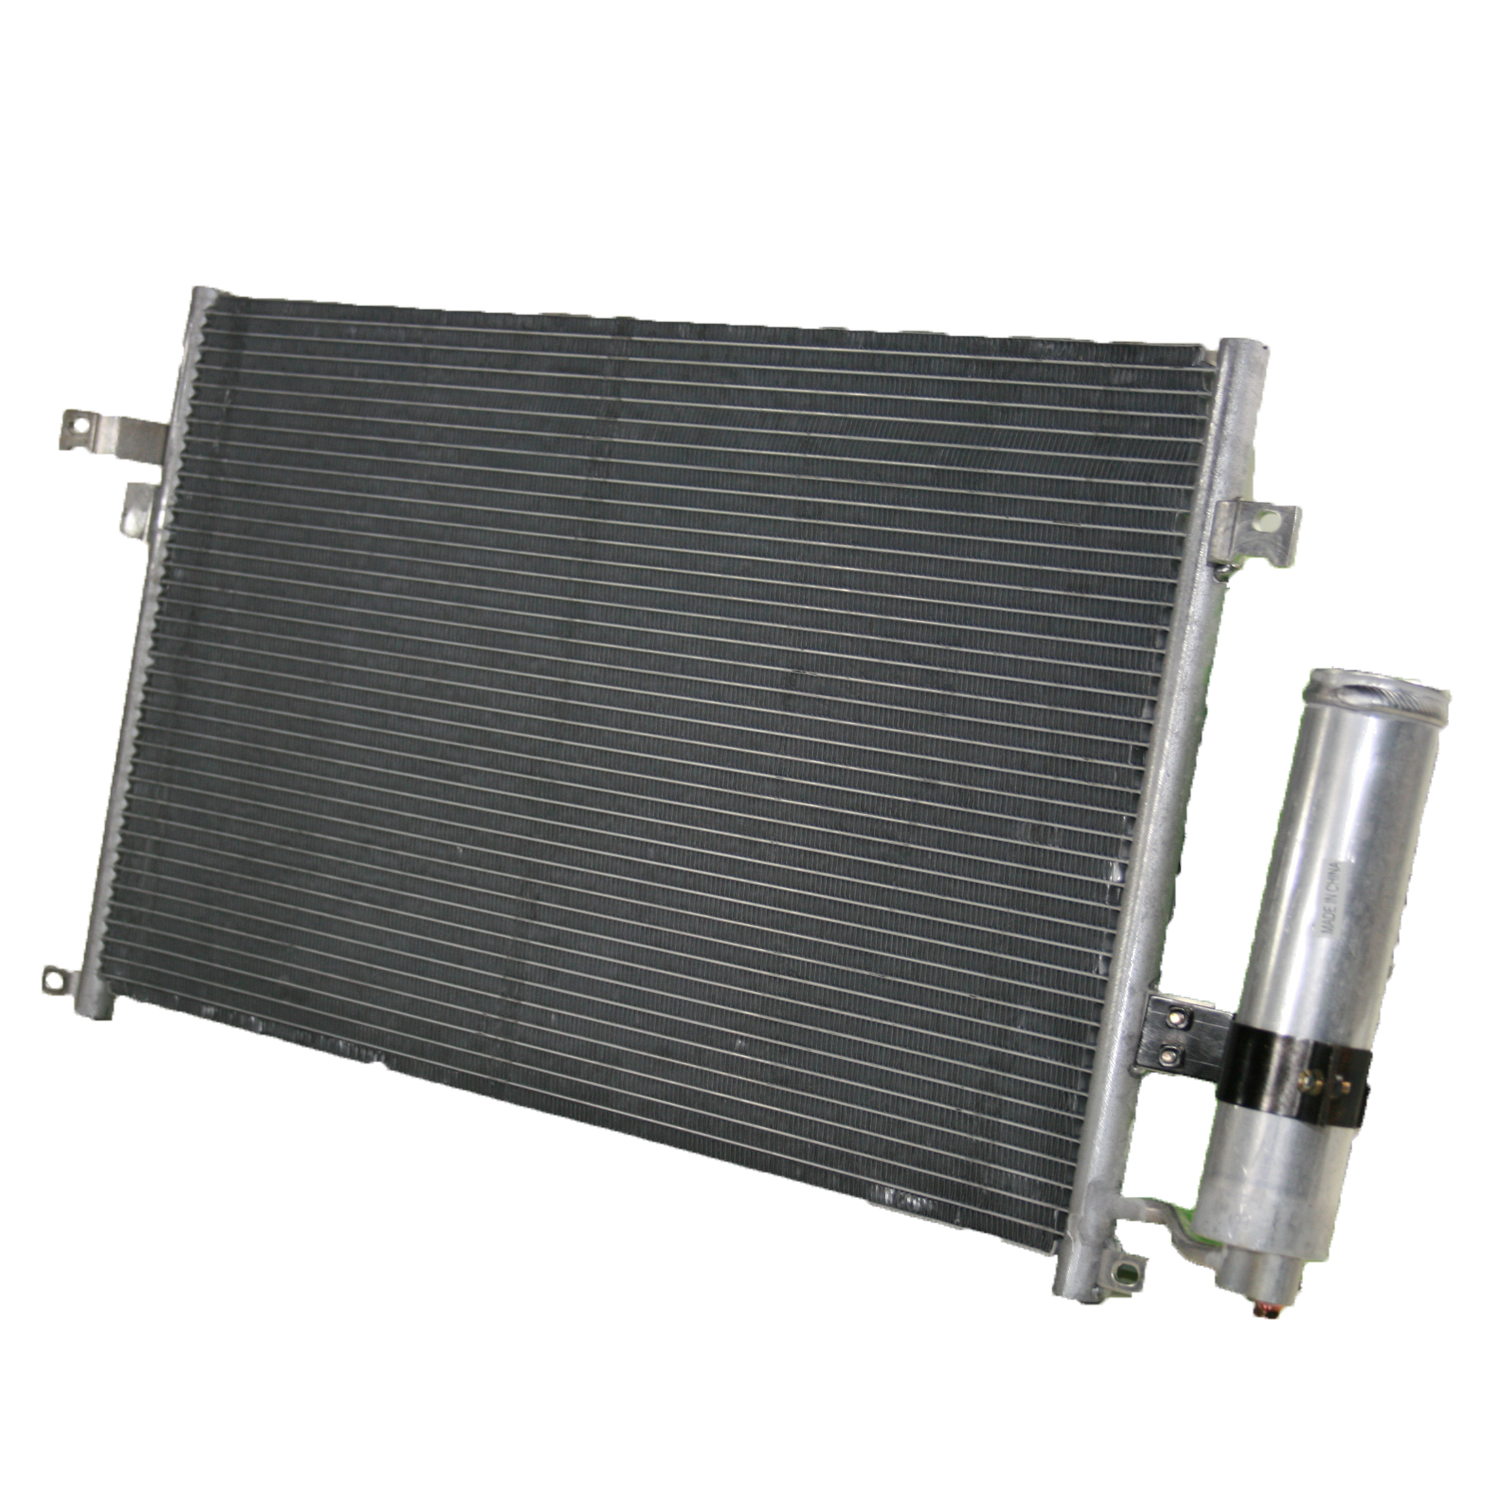 TCW Condenser 44-3055 New Product Image field_60b6a13a6e67c